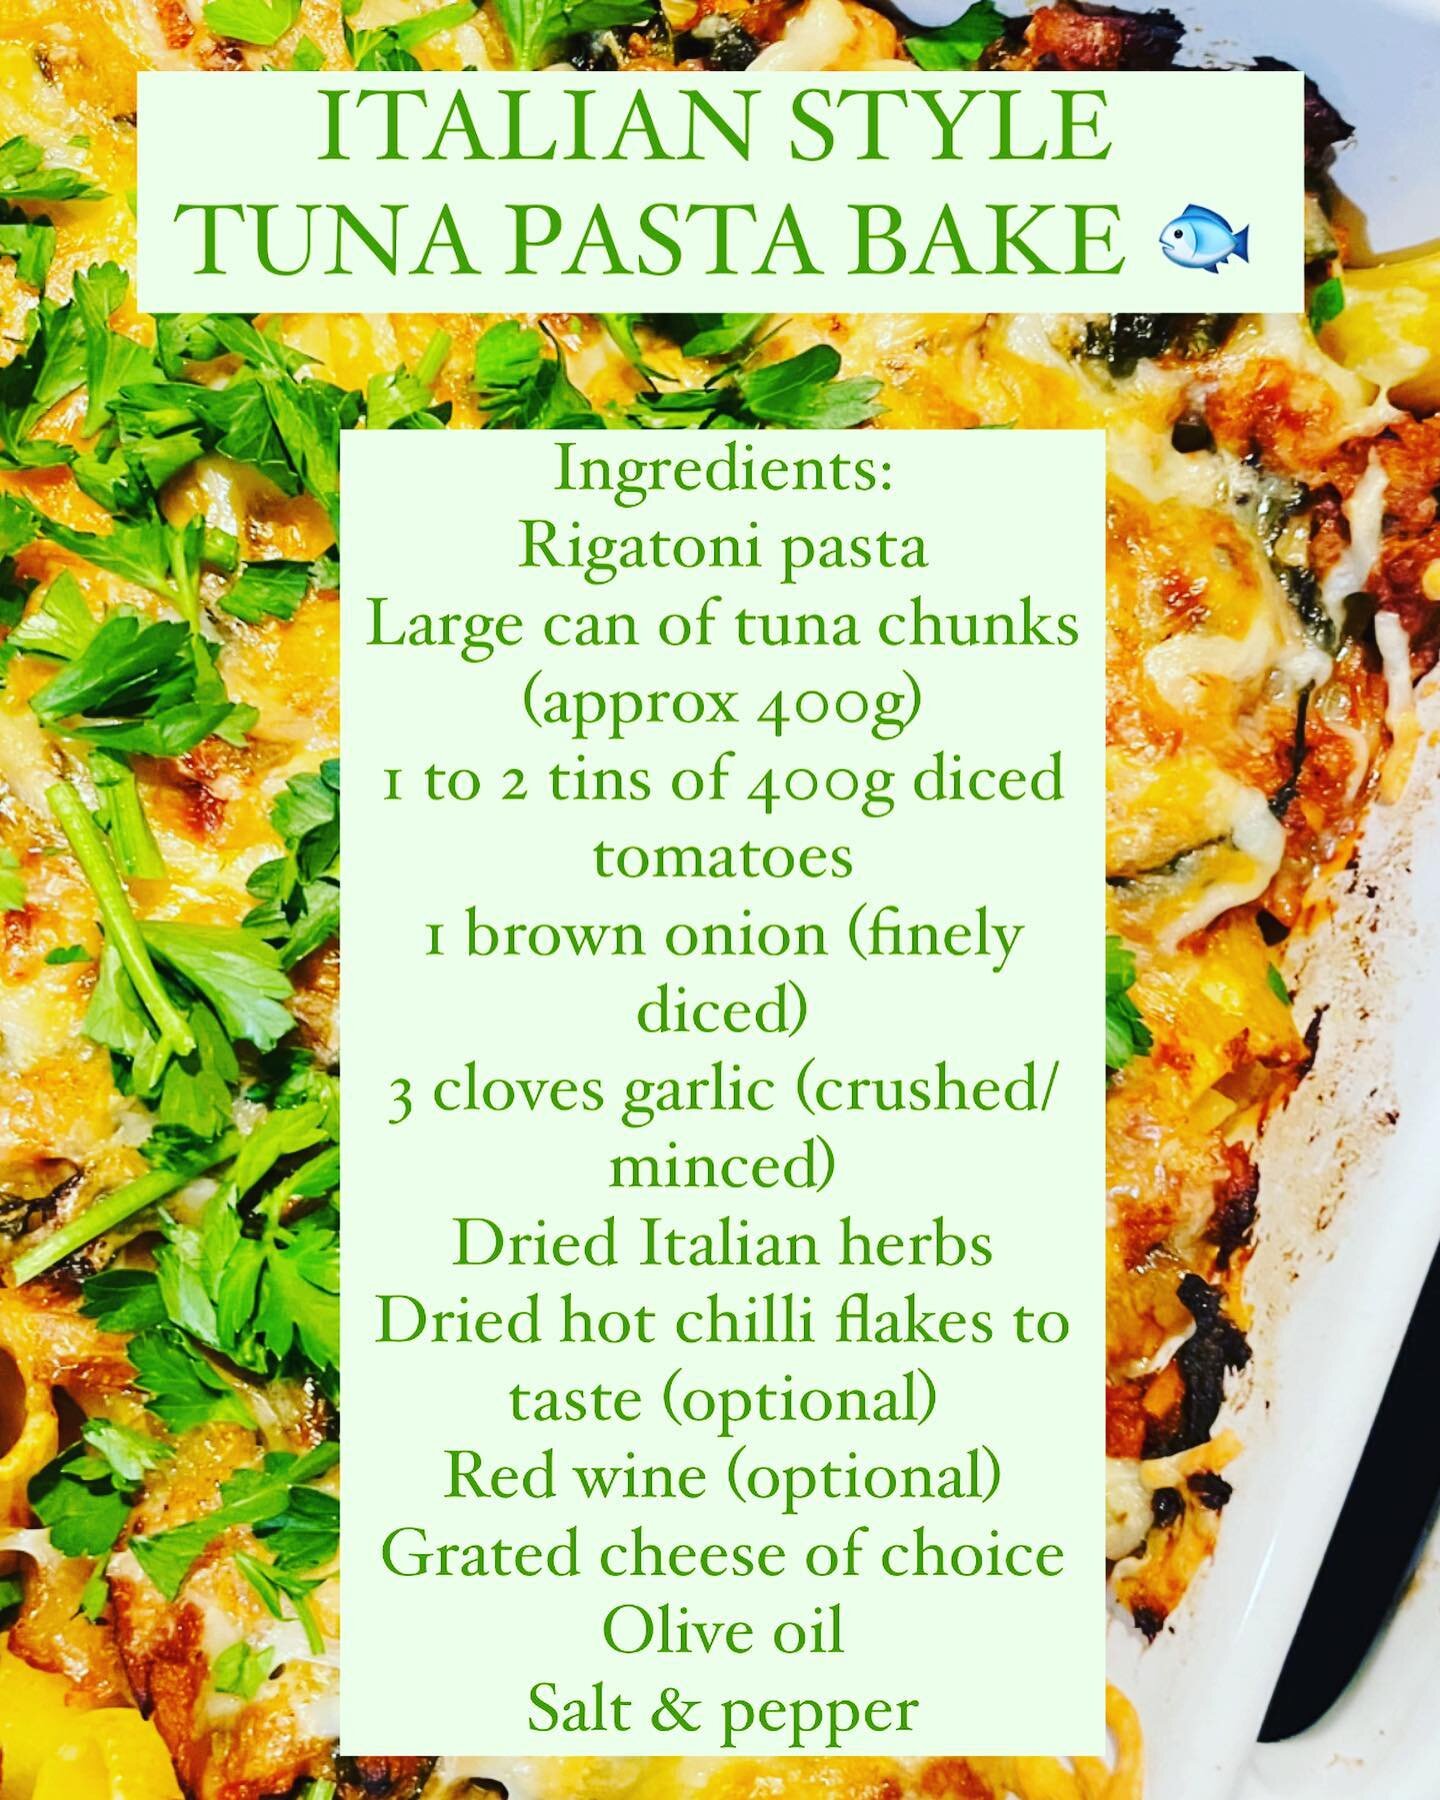 Treat your self mid week, or really anytime to this Italian inspired tuna bake&hellip;. go on you deserve it 😉